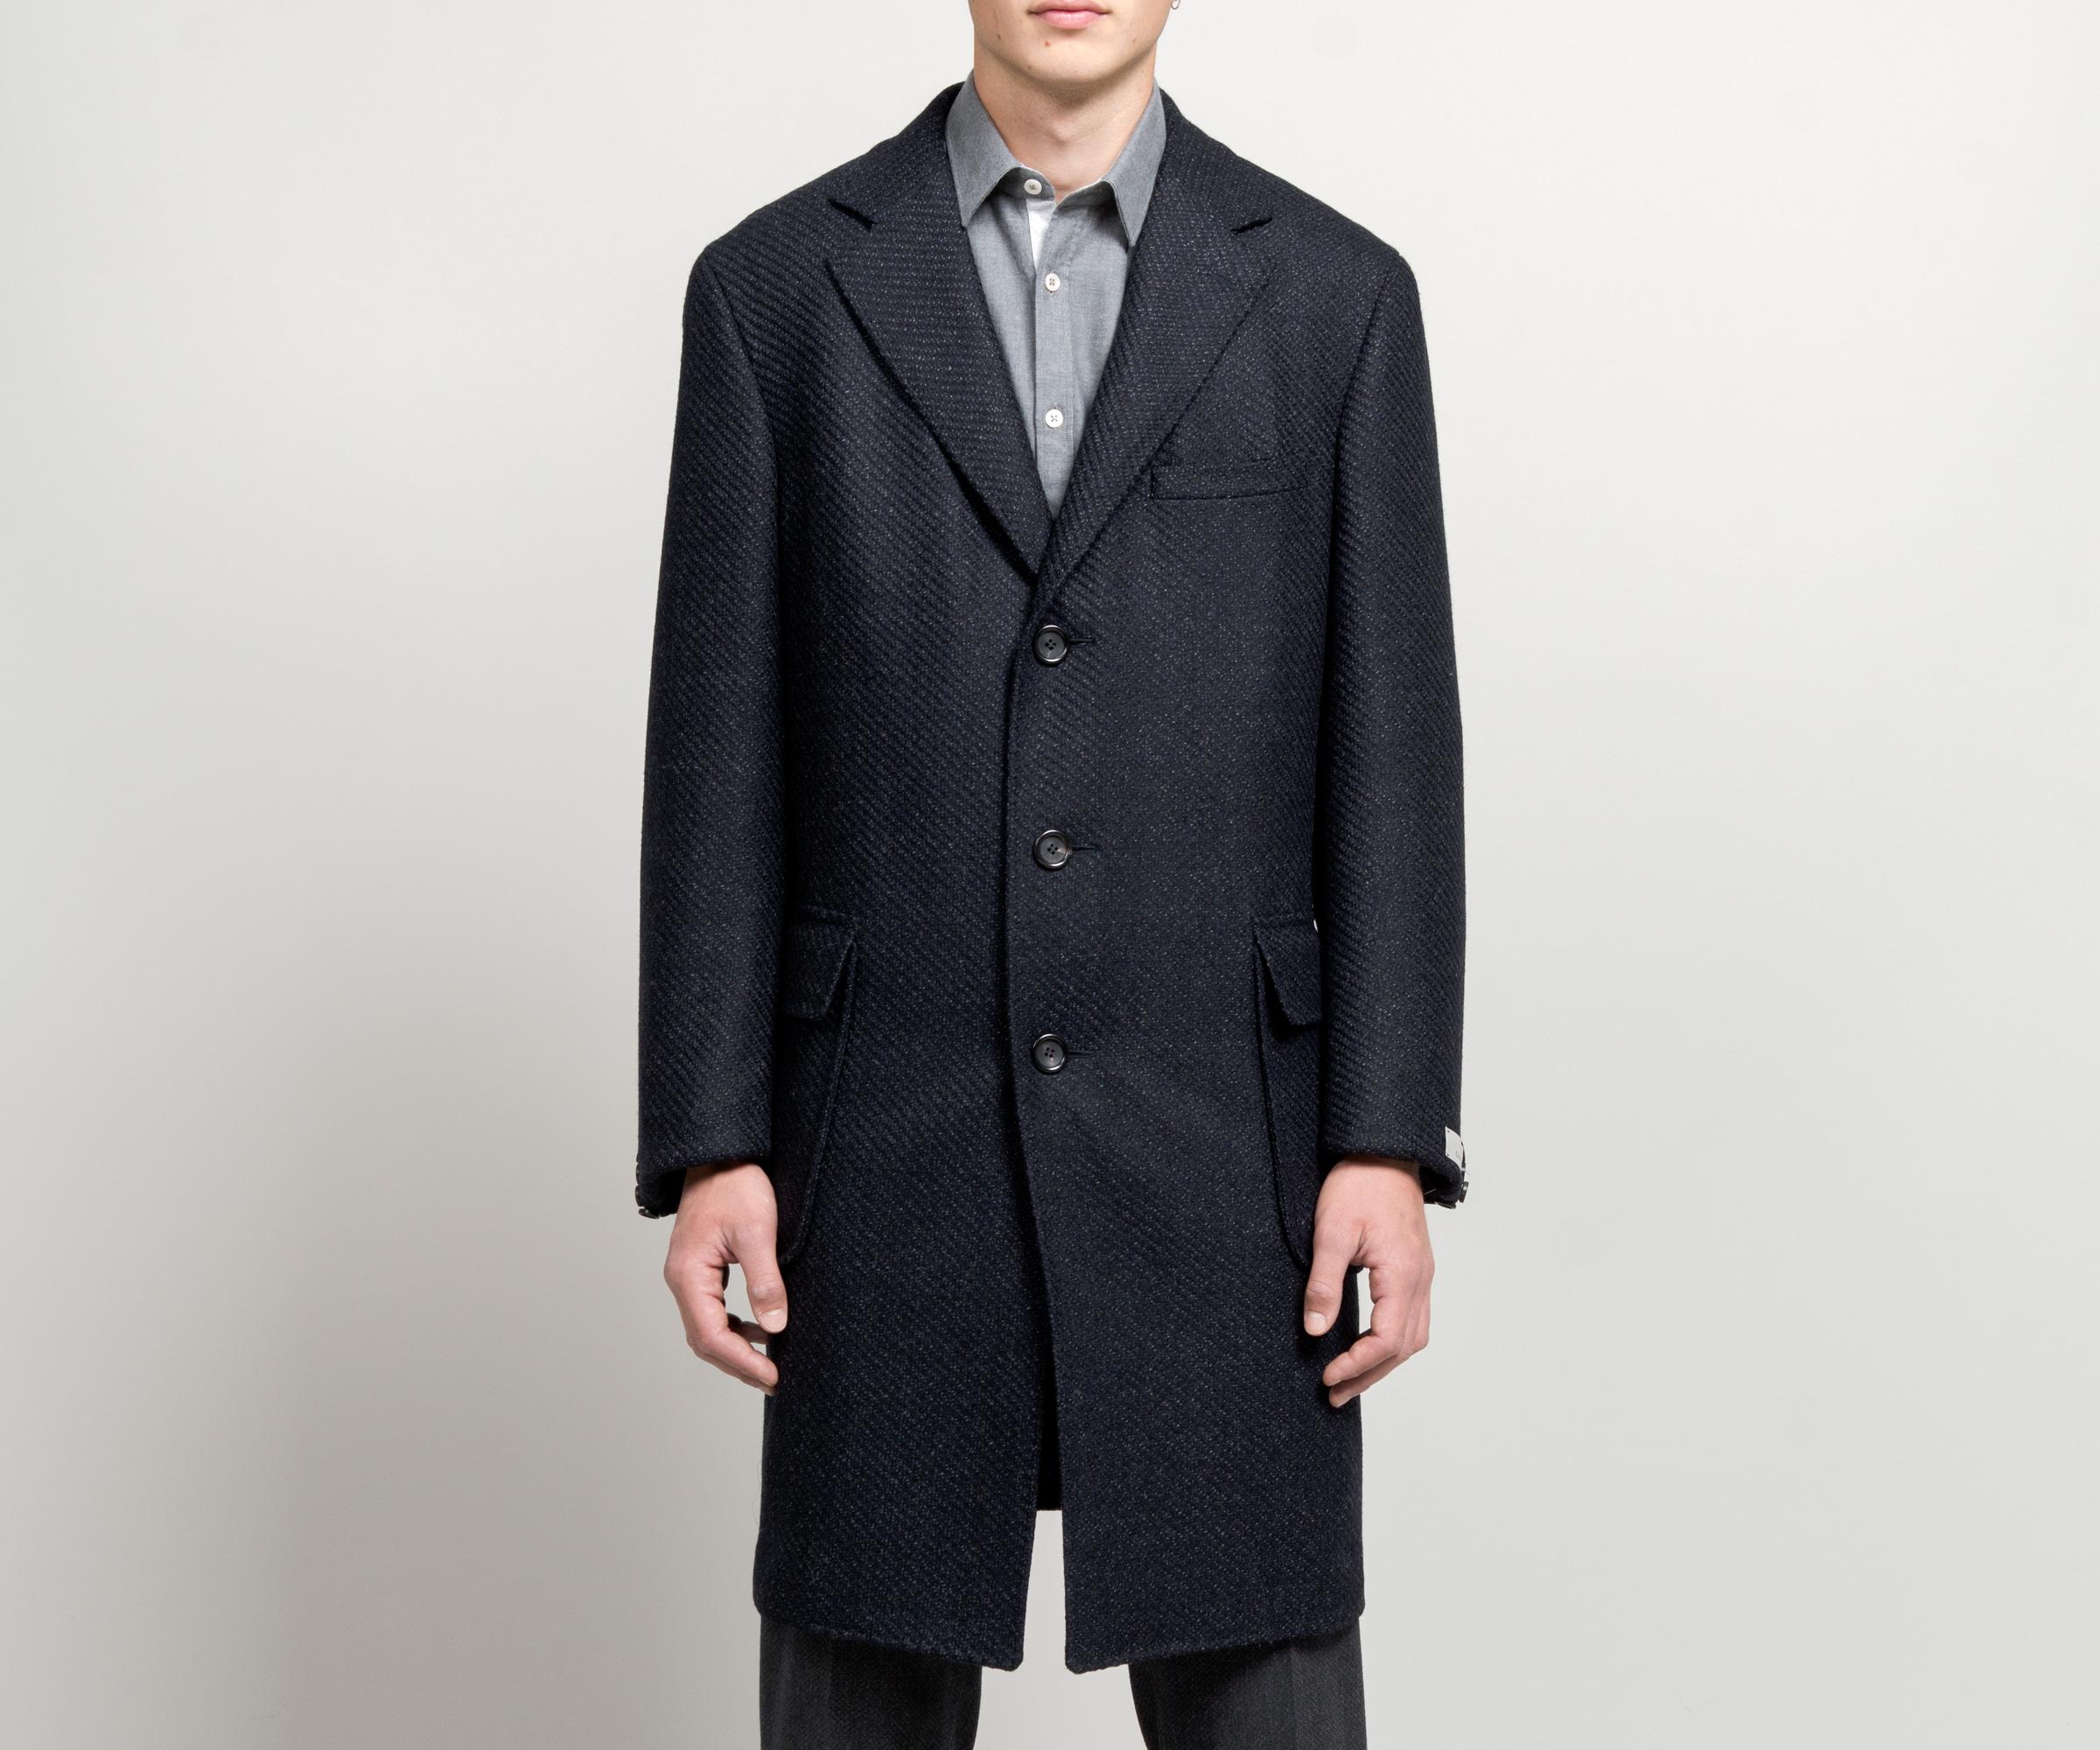 Canali 'kei' Speckled Detail Overcoat Navy in Blue for Men - Lyst